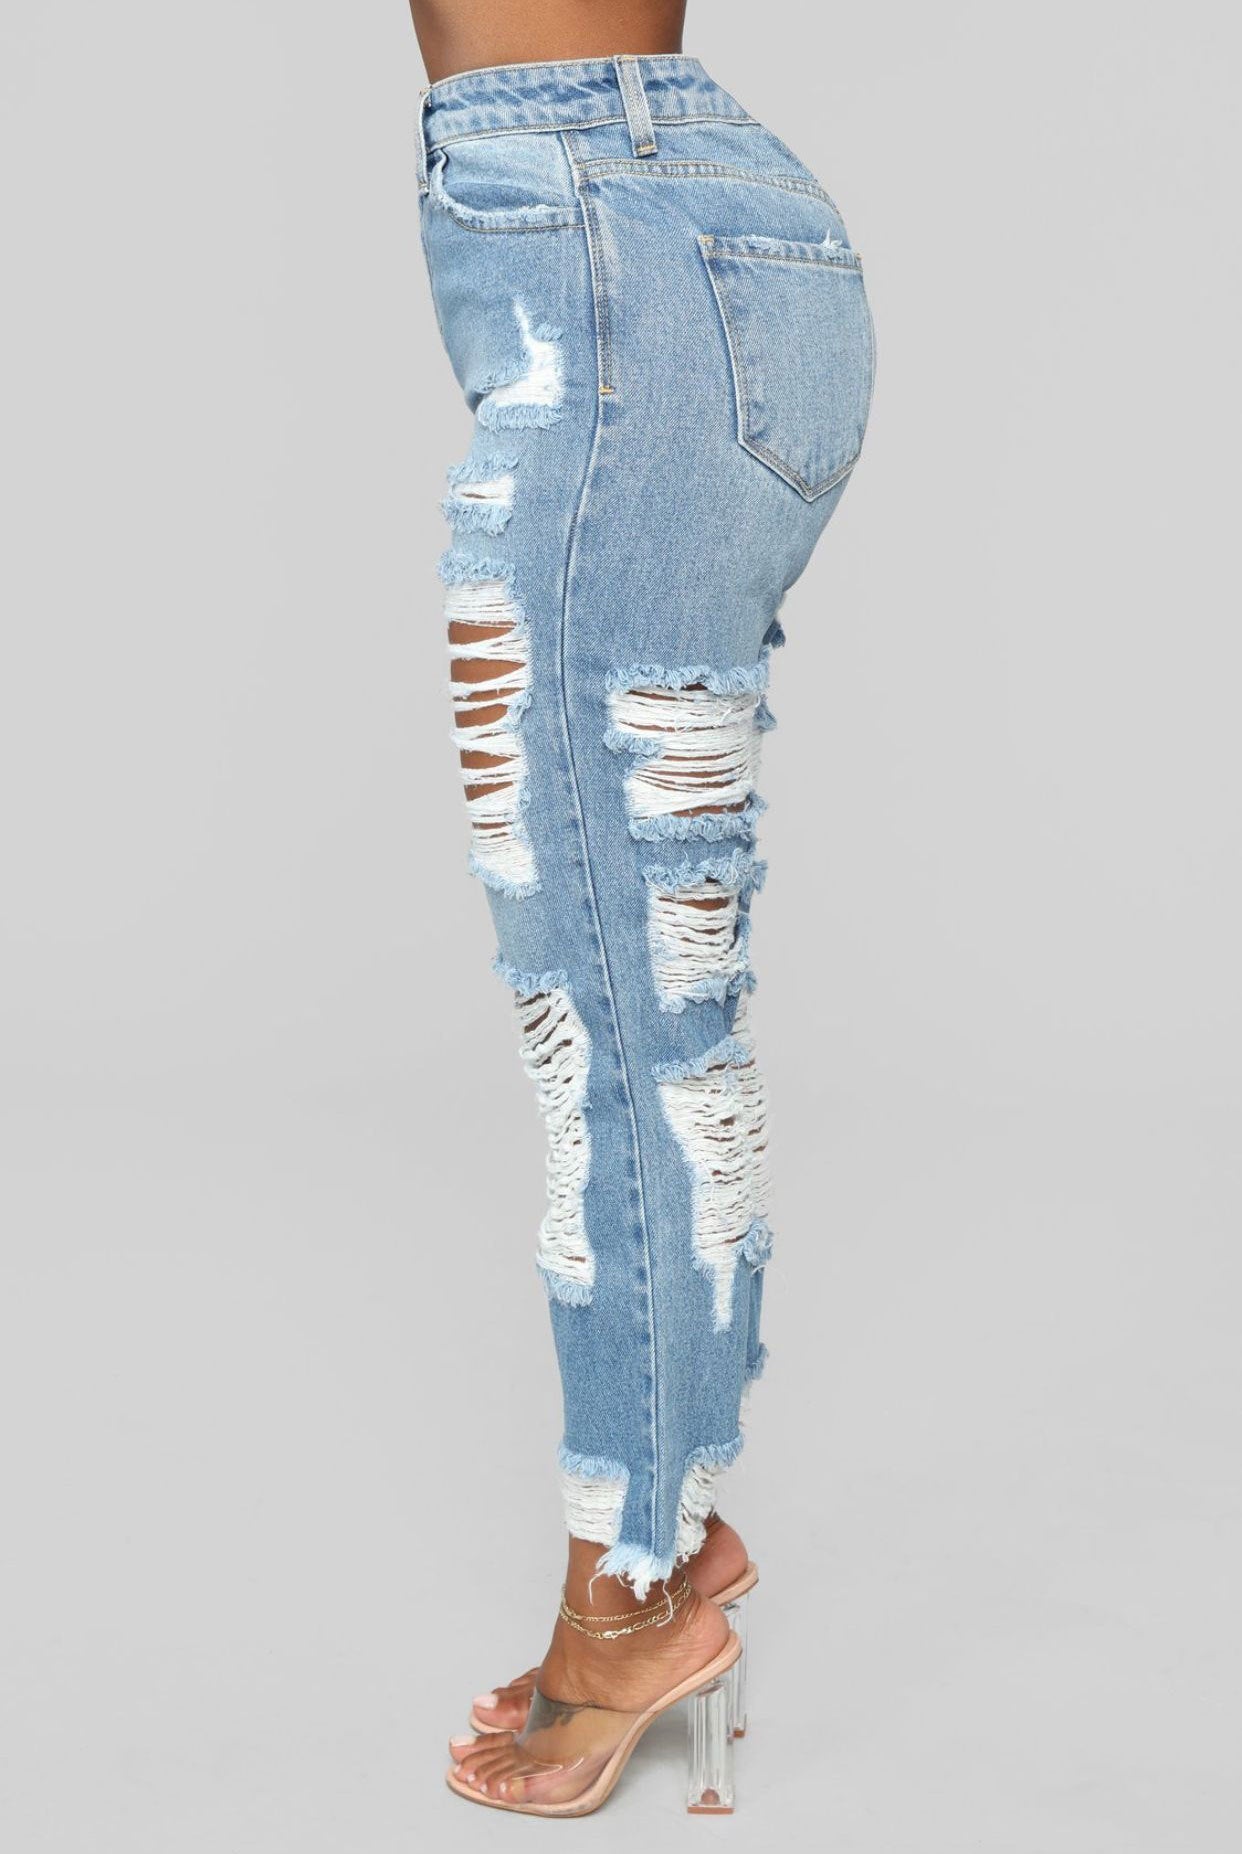 ripped jeans in the back and front